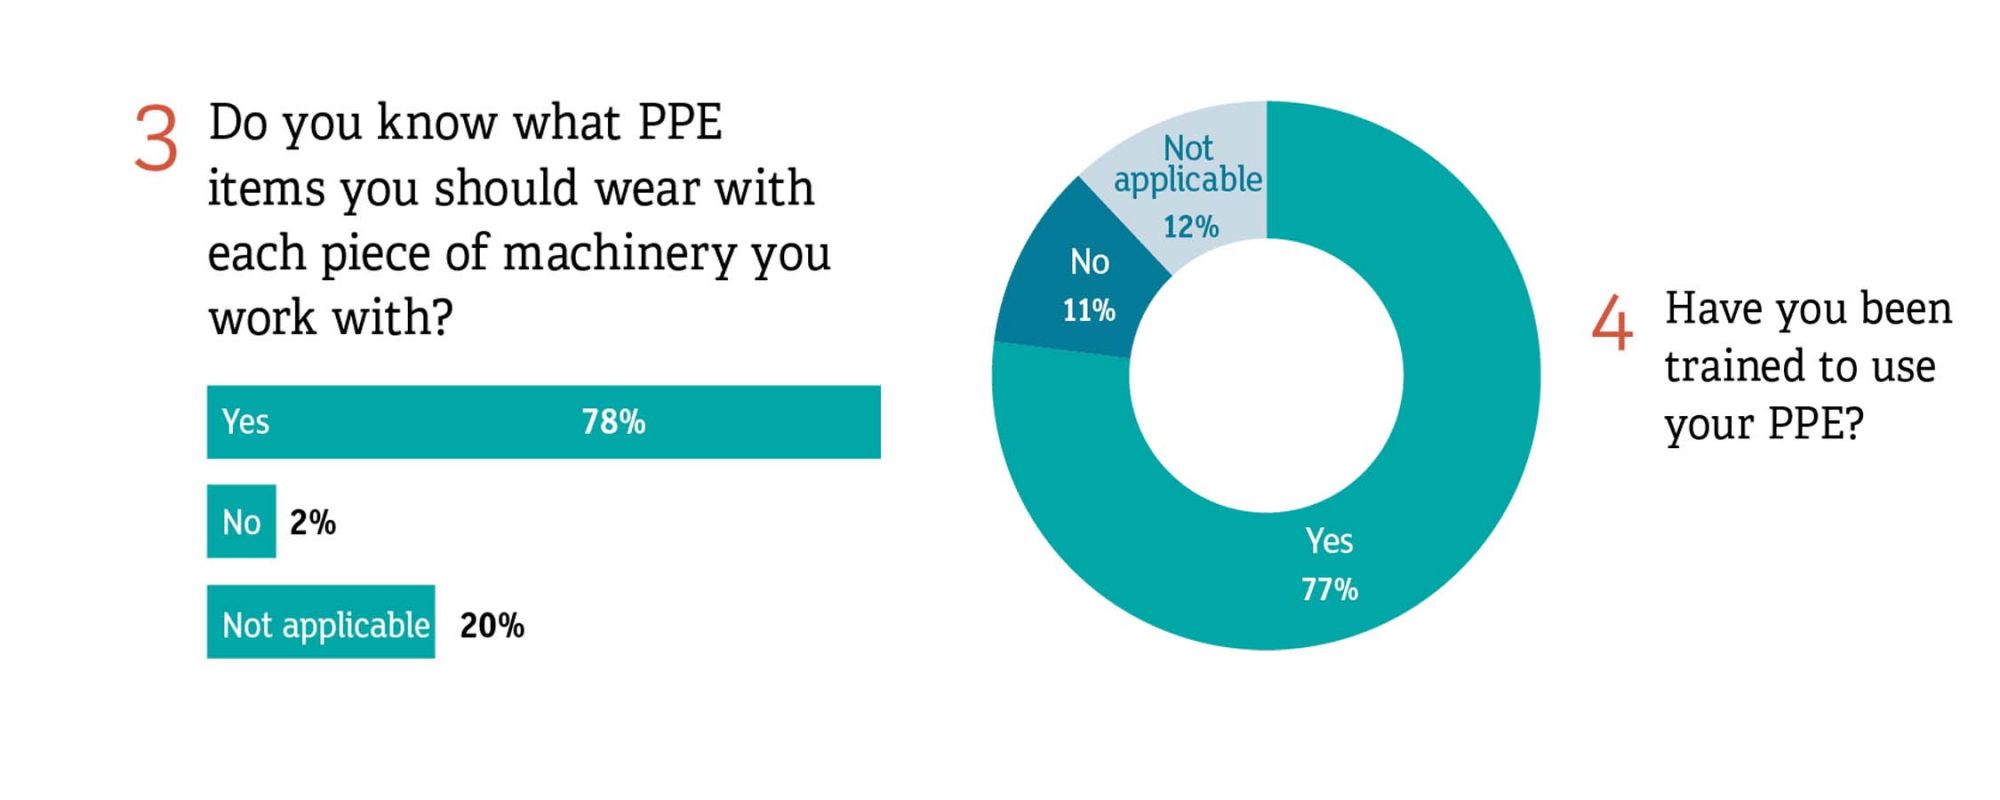 Do you know what PPE items you should wear? Have you been trained to use your PPE?